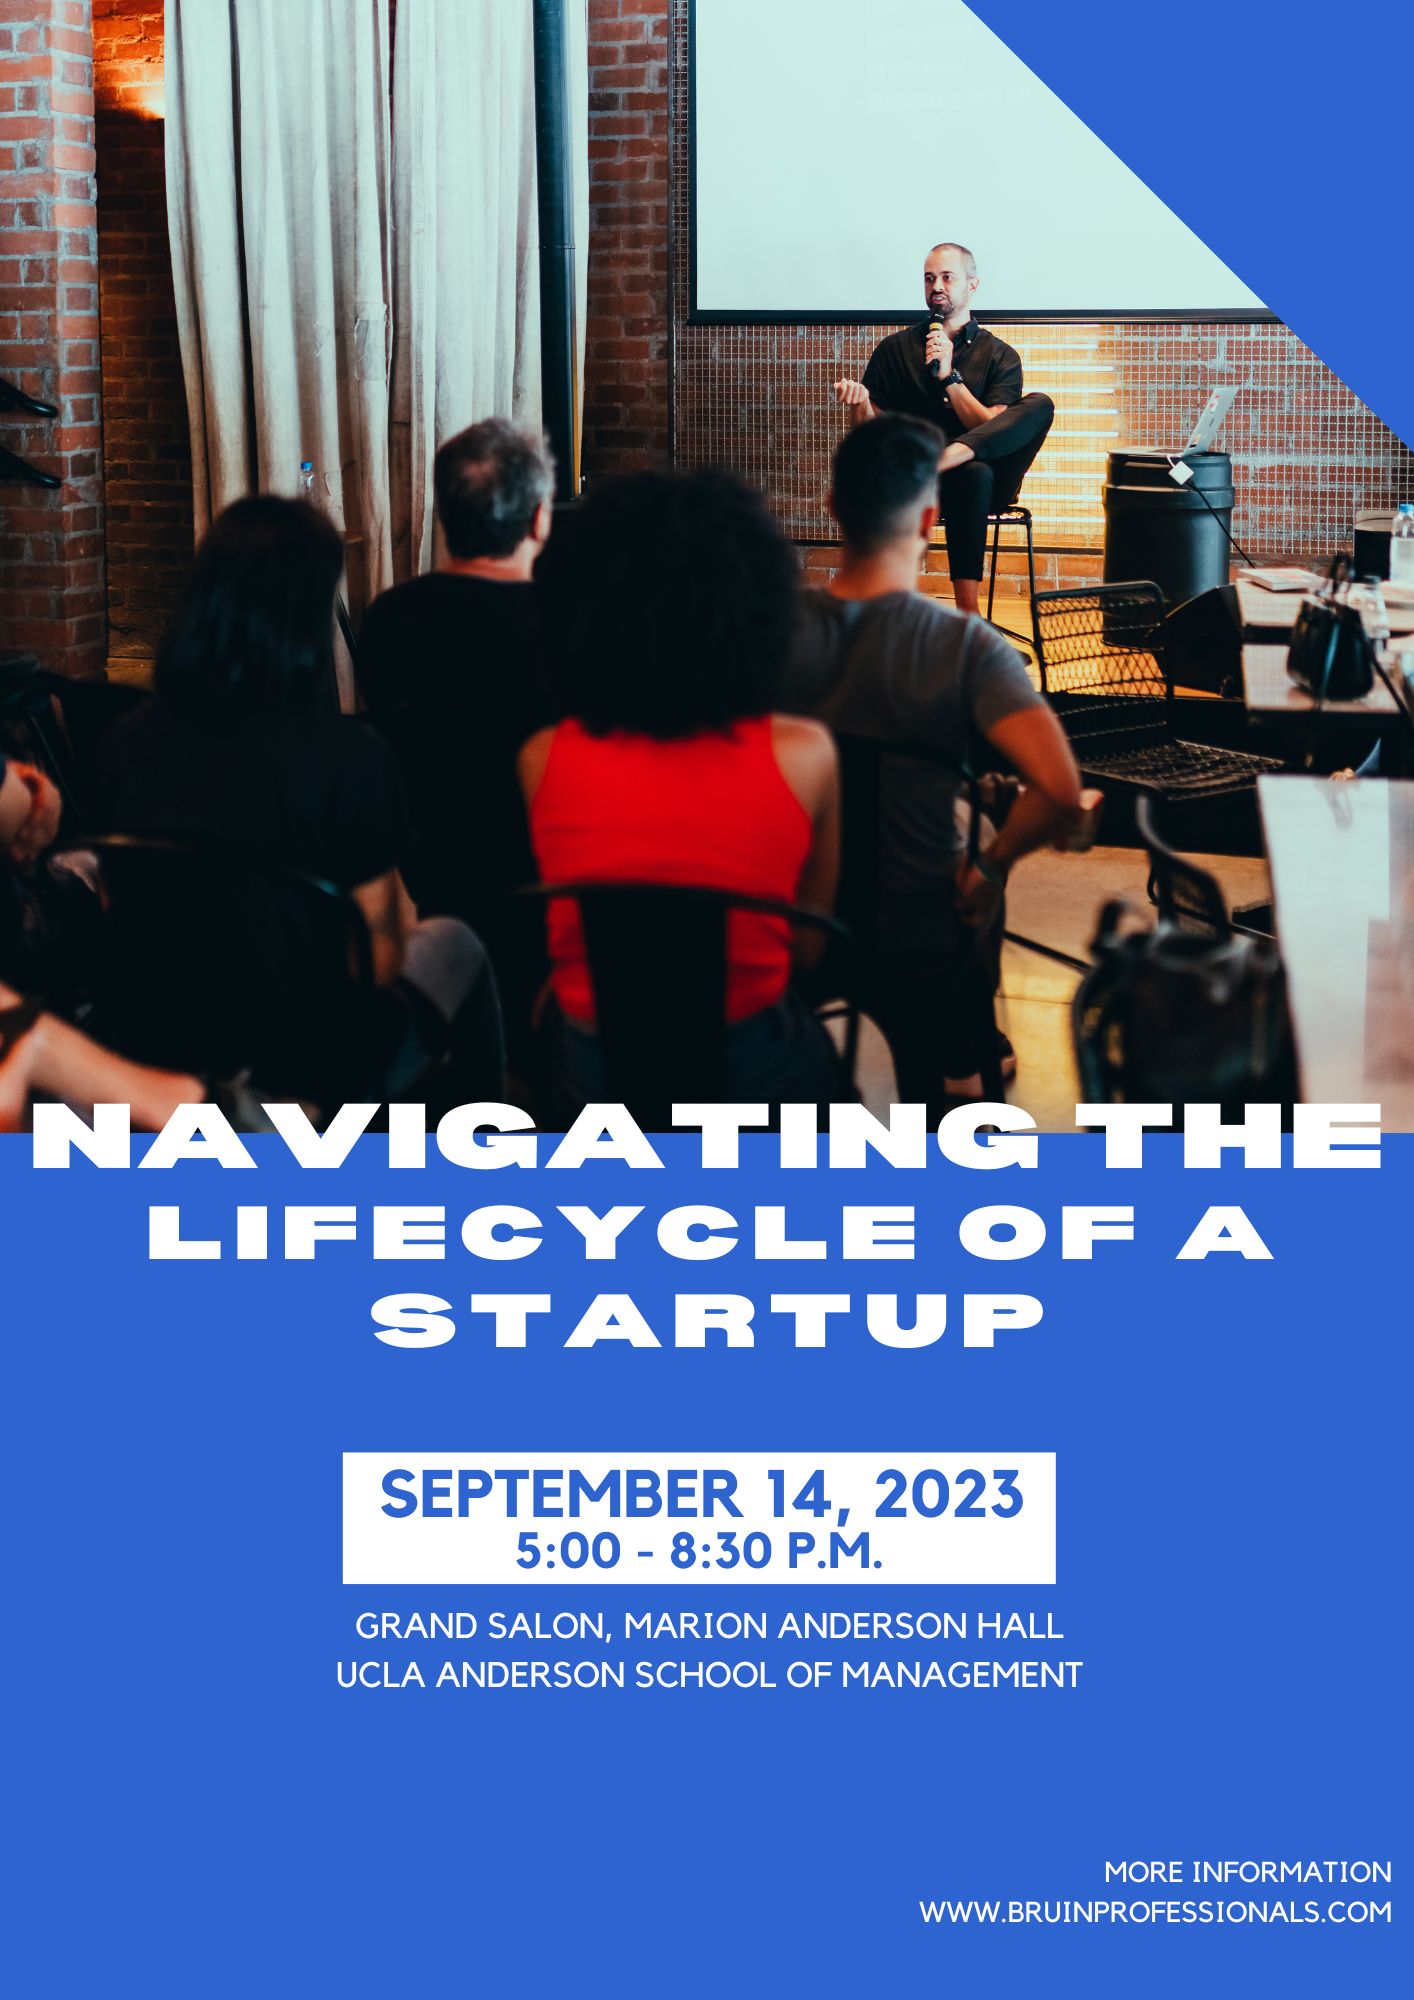 Navigating the lifecycle of a startup event